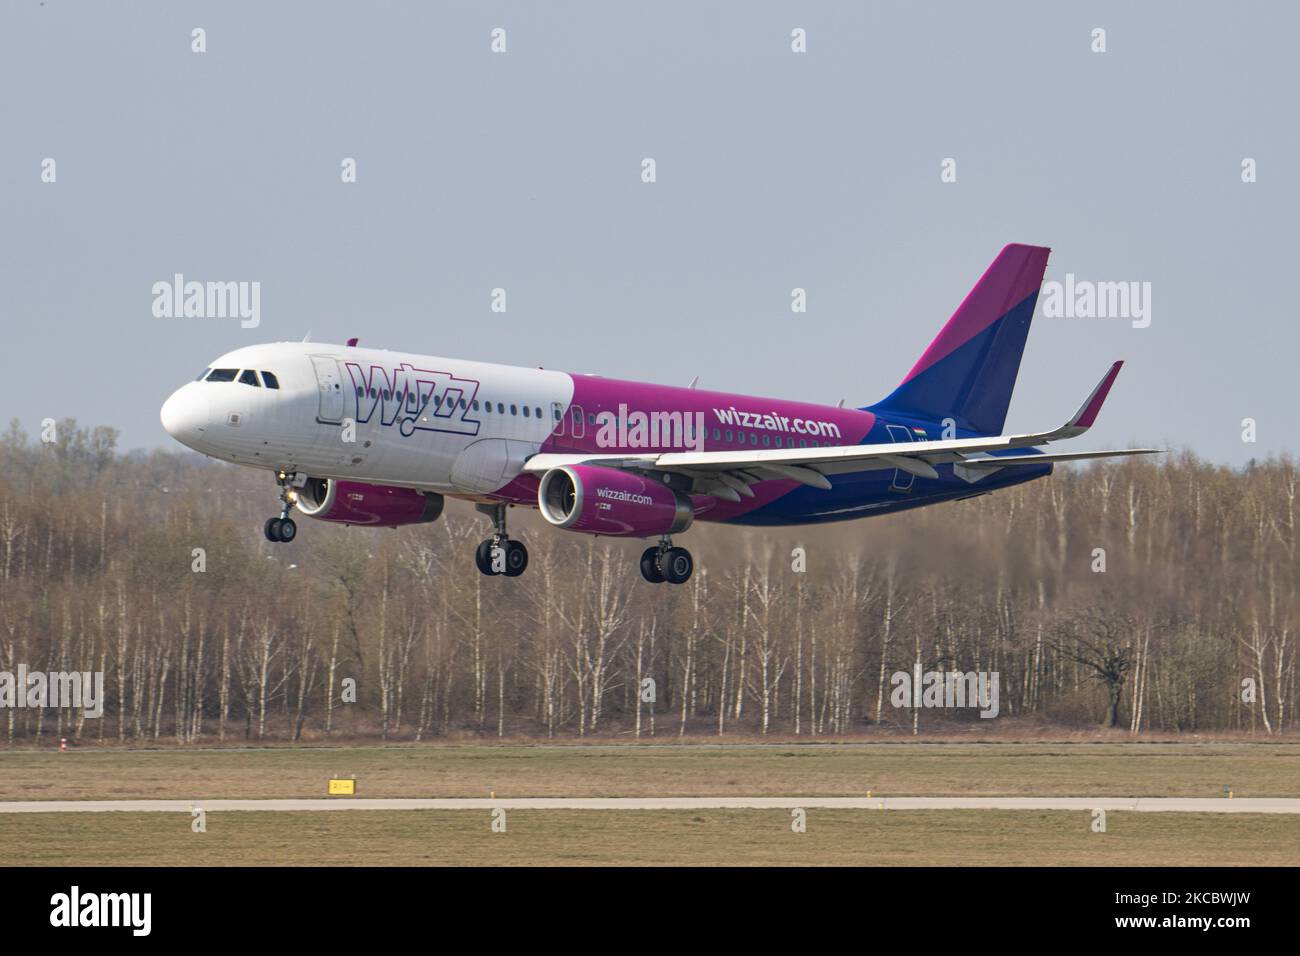 Wizz Air Airbus A320 aircraft as seen on final approach landing at ...